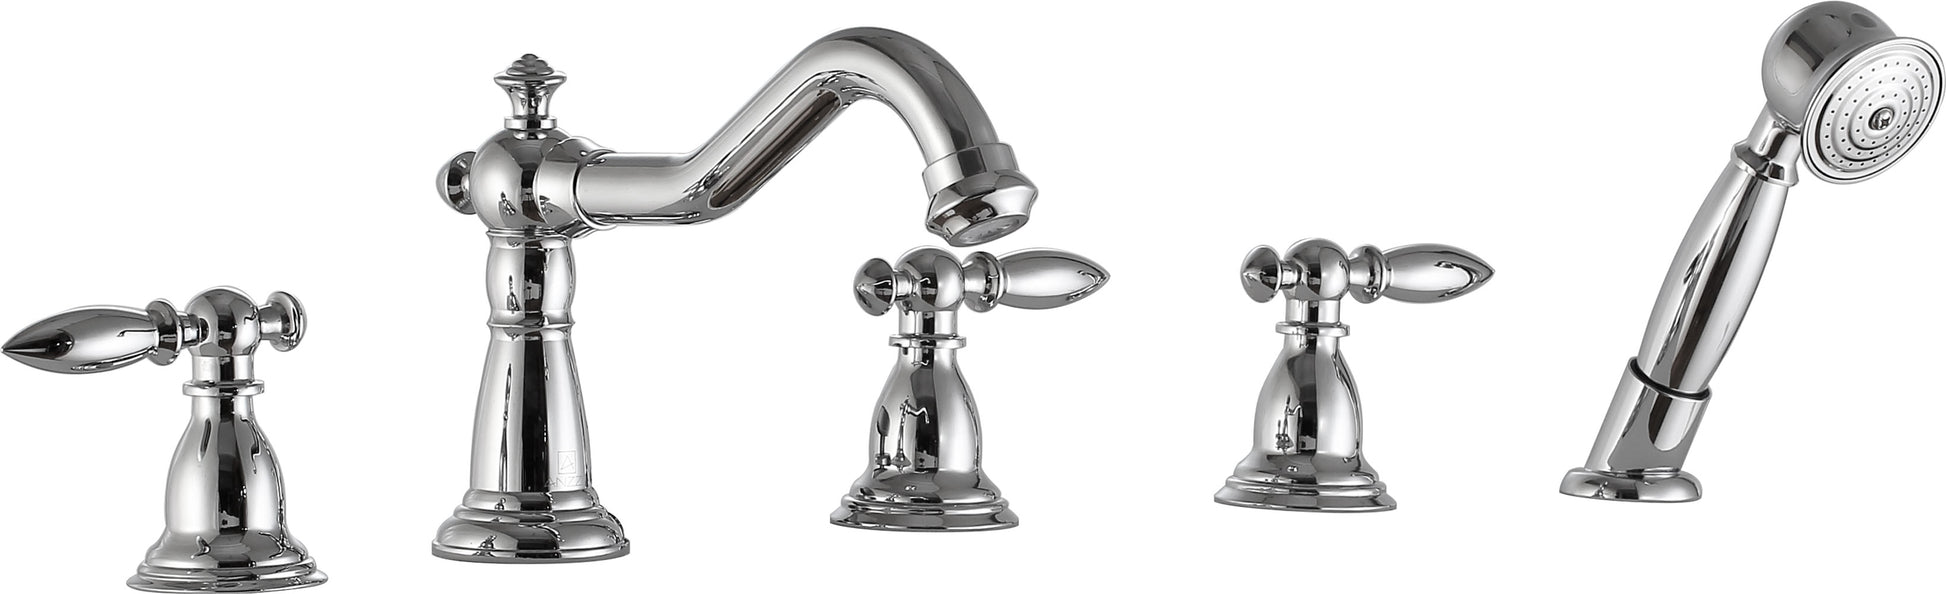 FR-AZ091CH - Patriarch 2-Handle Deck-Mount Roman Tub Faucet with Handheld Sprayer in Polished Chrome